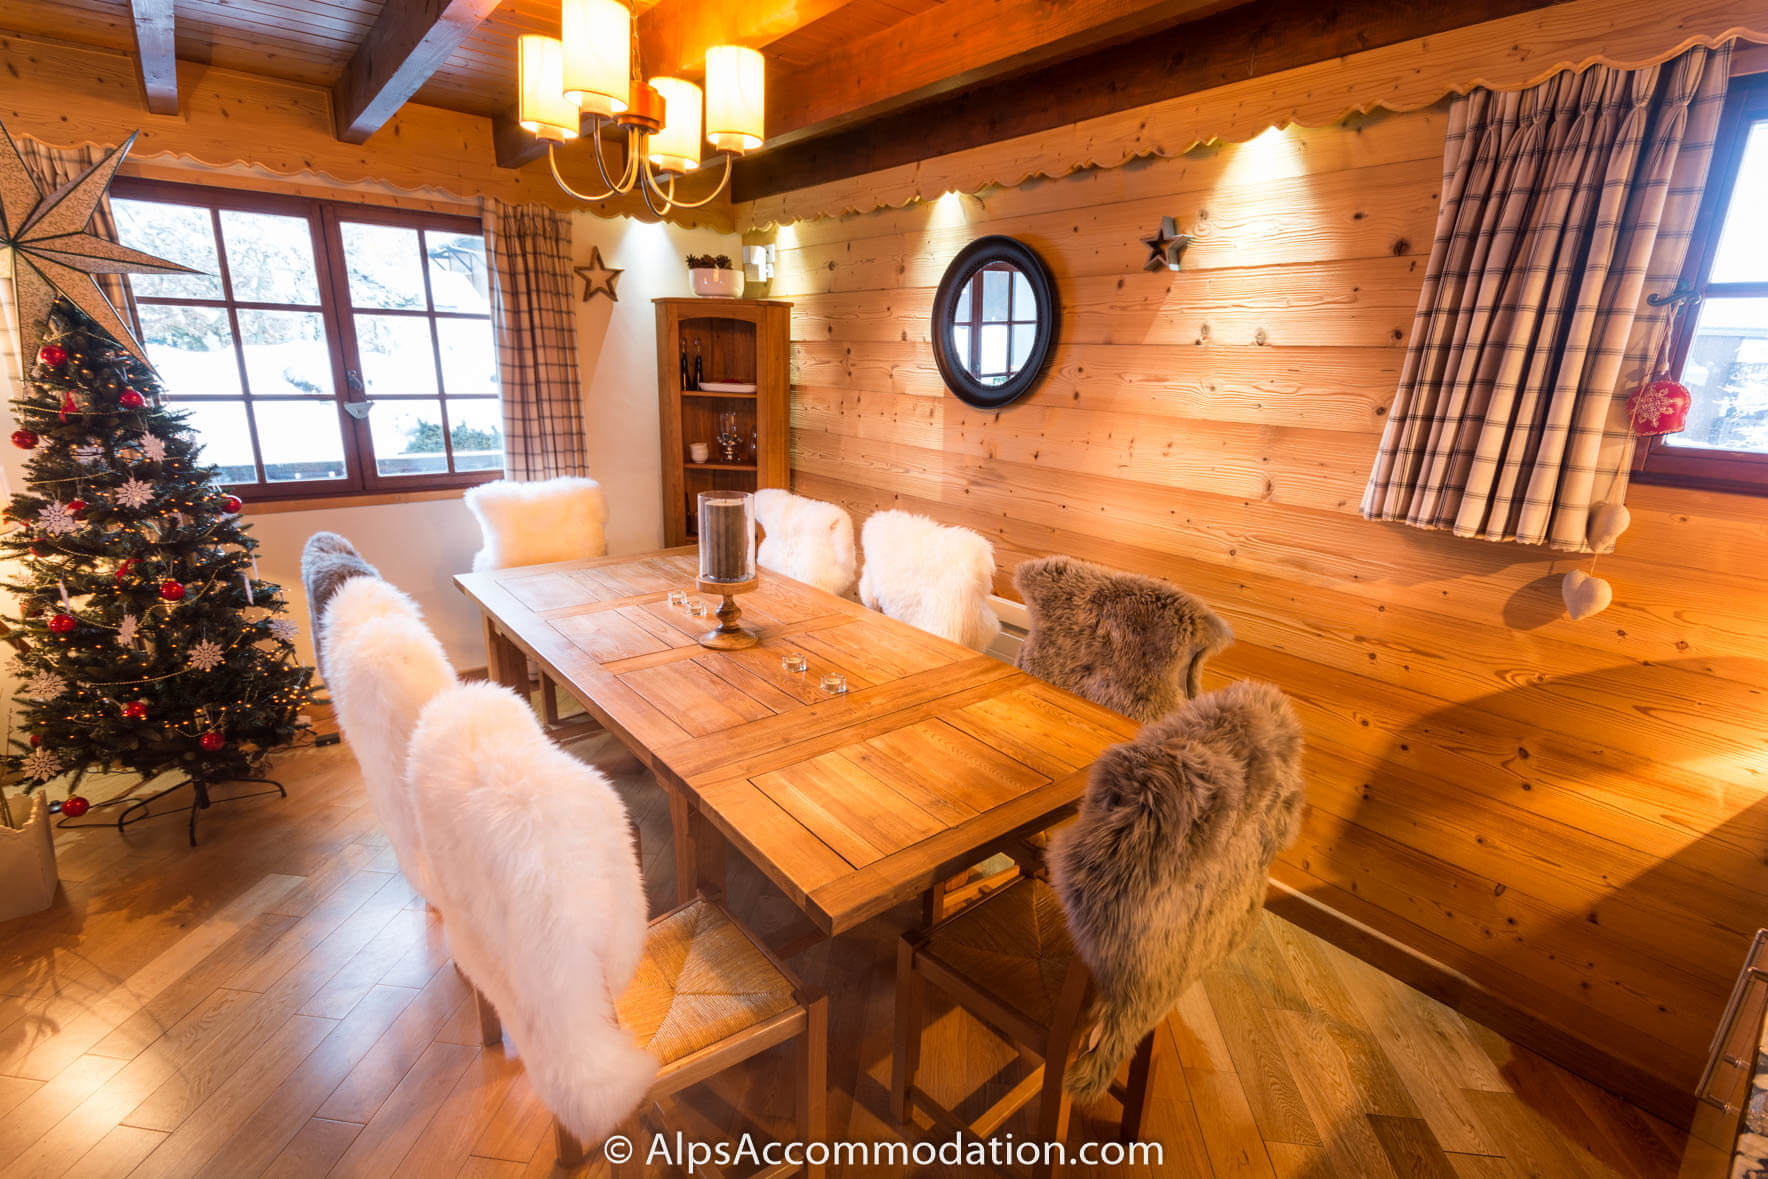 Chalet Étoile Morillon - The dining area seats up to 10 comfortably and features a raclette machine